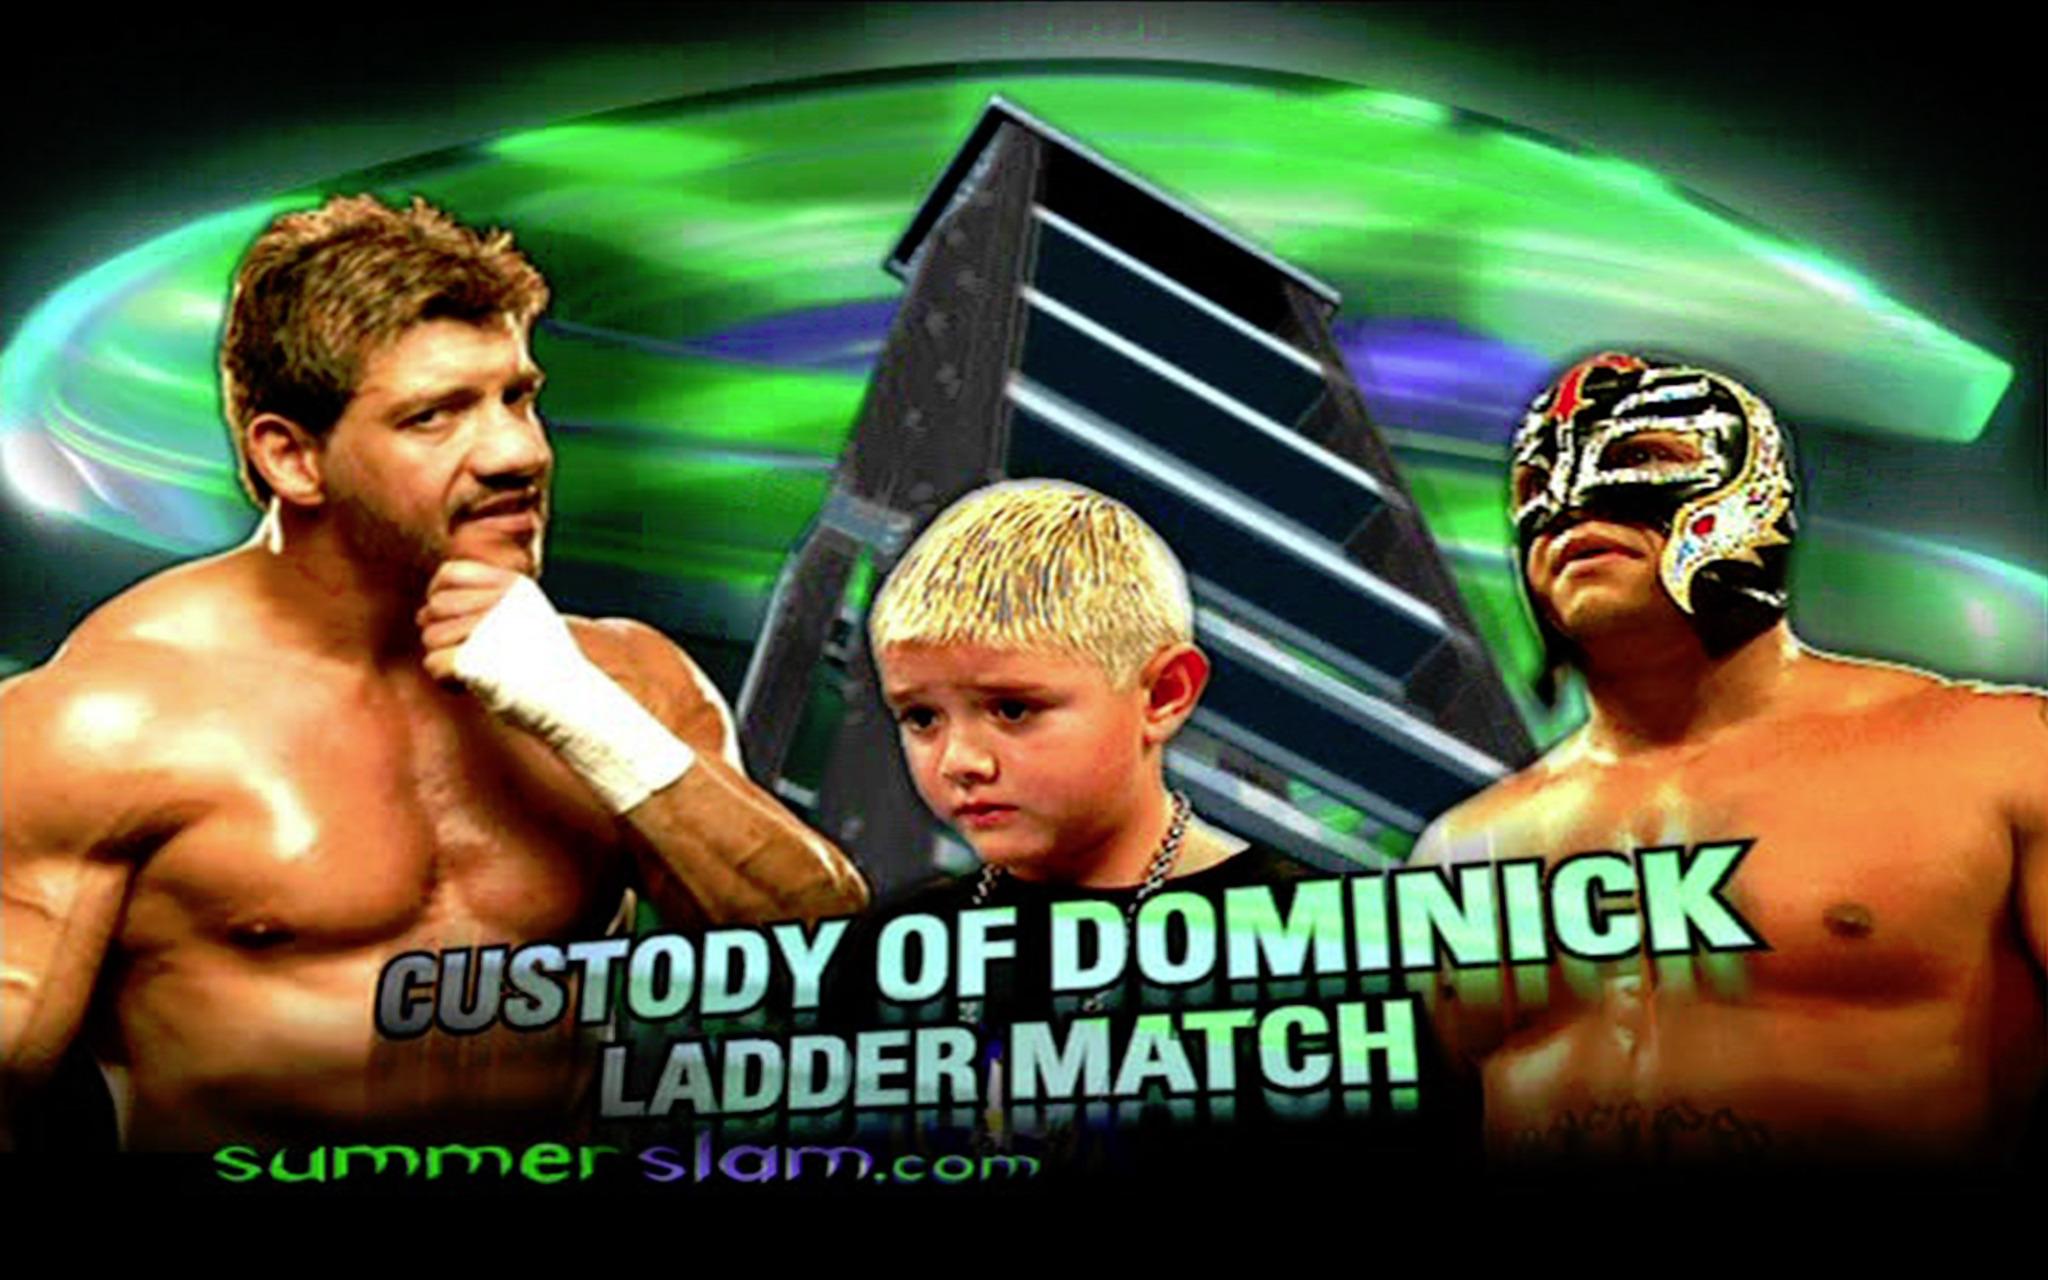 A gimmick match graphic from WWE SummerSlam 2005.